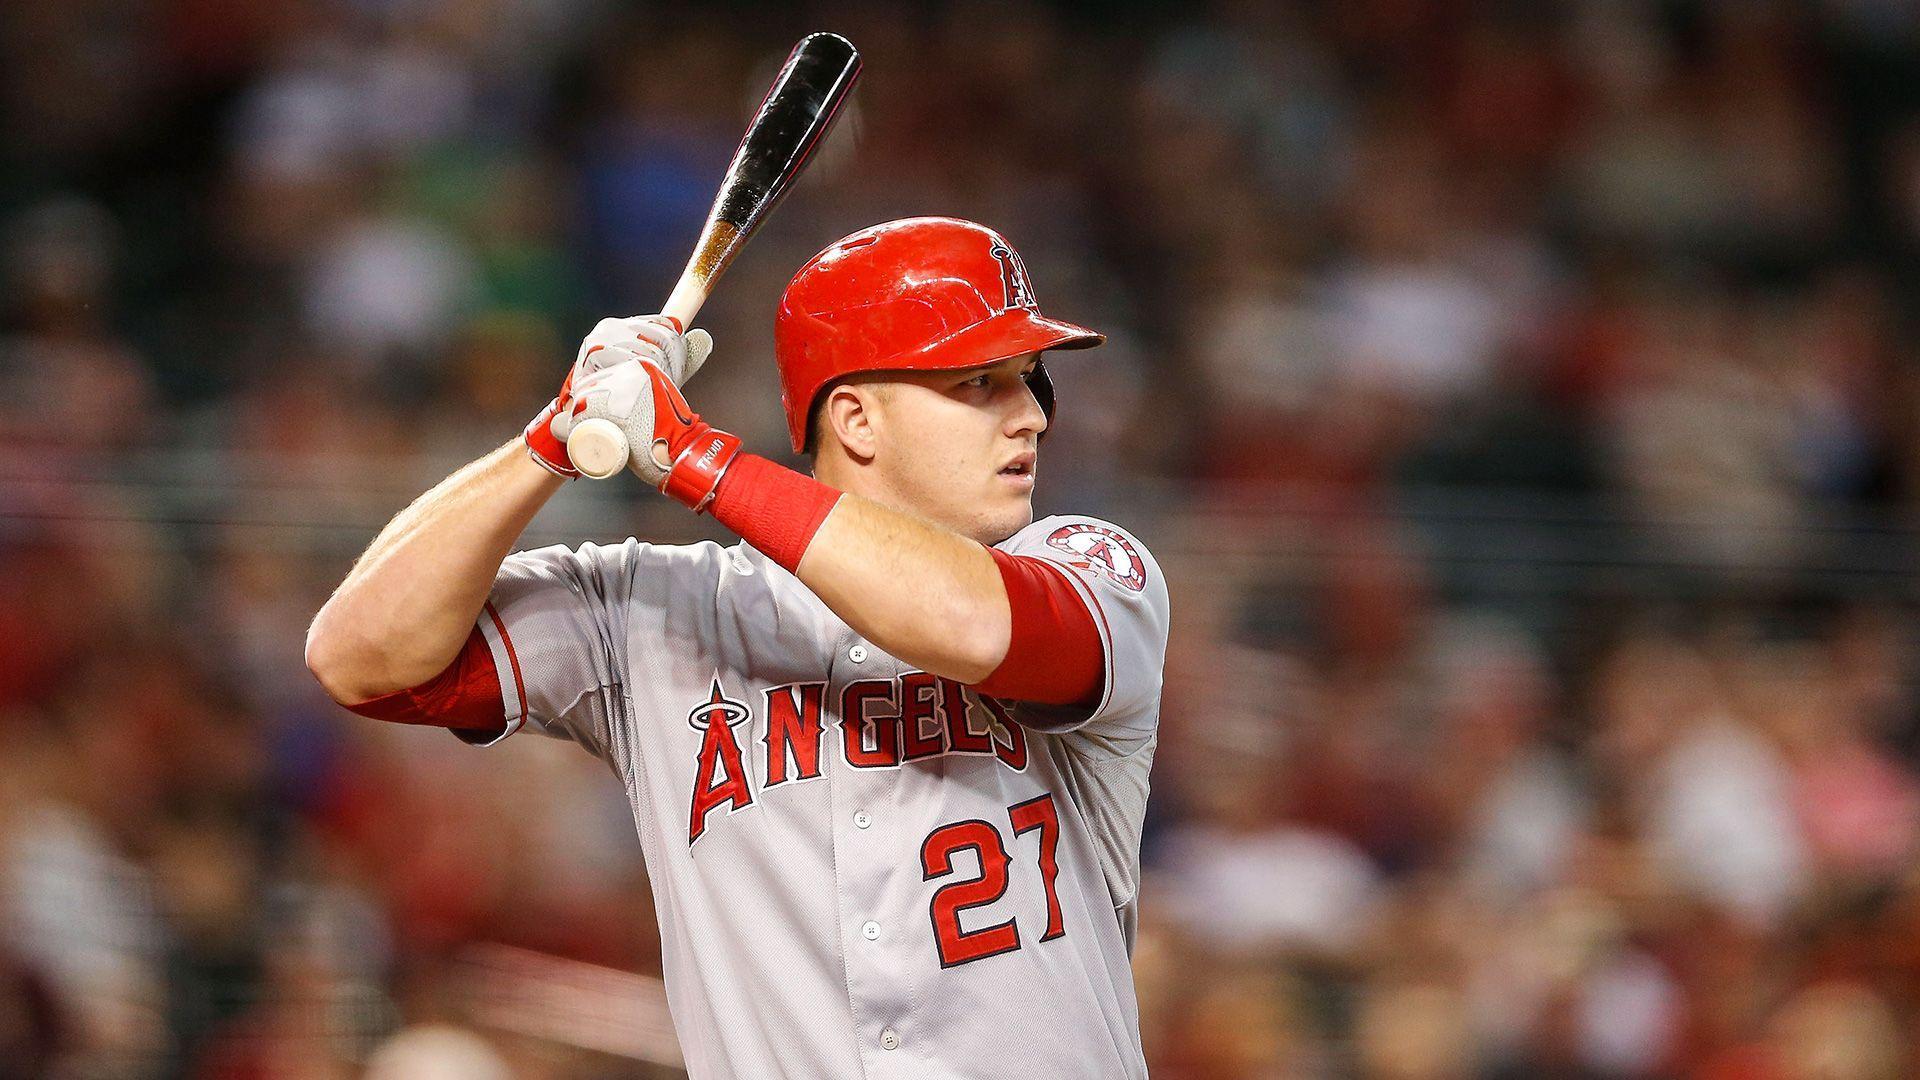 Angels celebrate Mike Trout's engagement by plating 21 vs. Red Sox